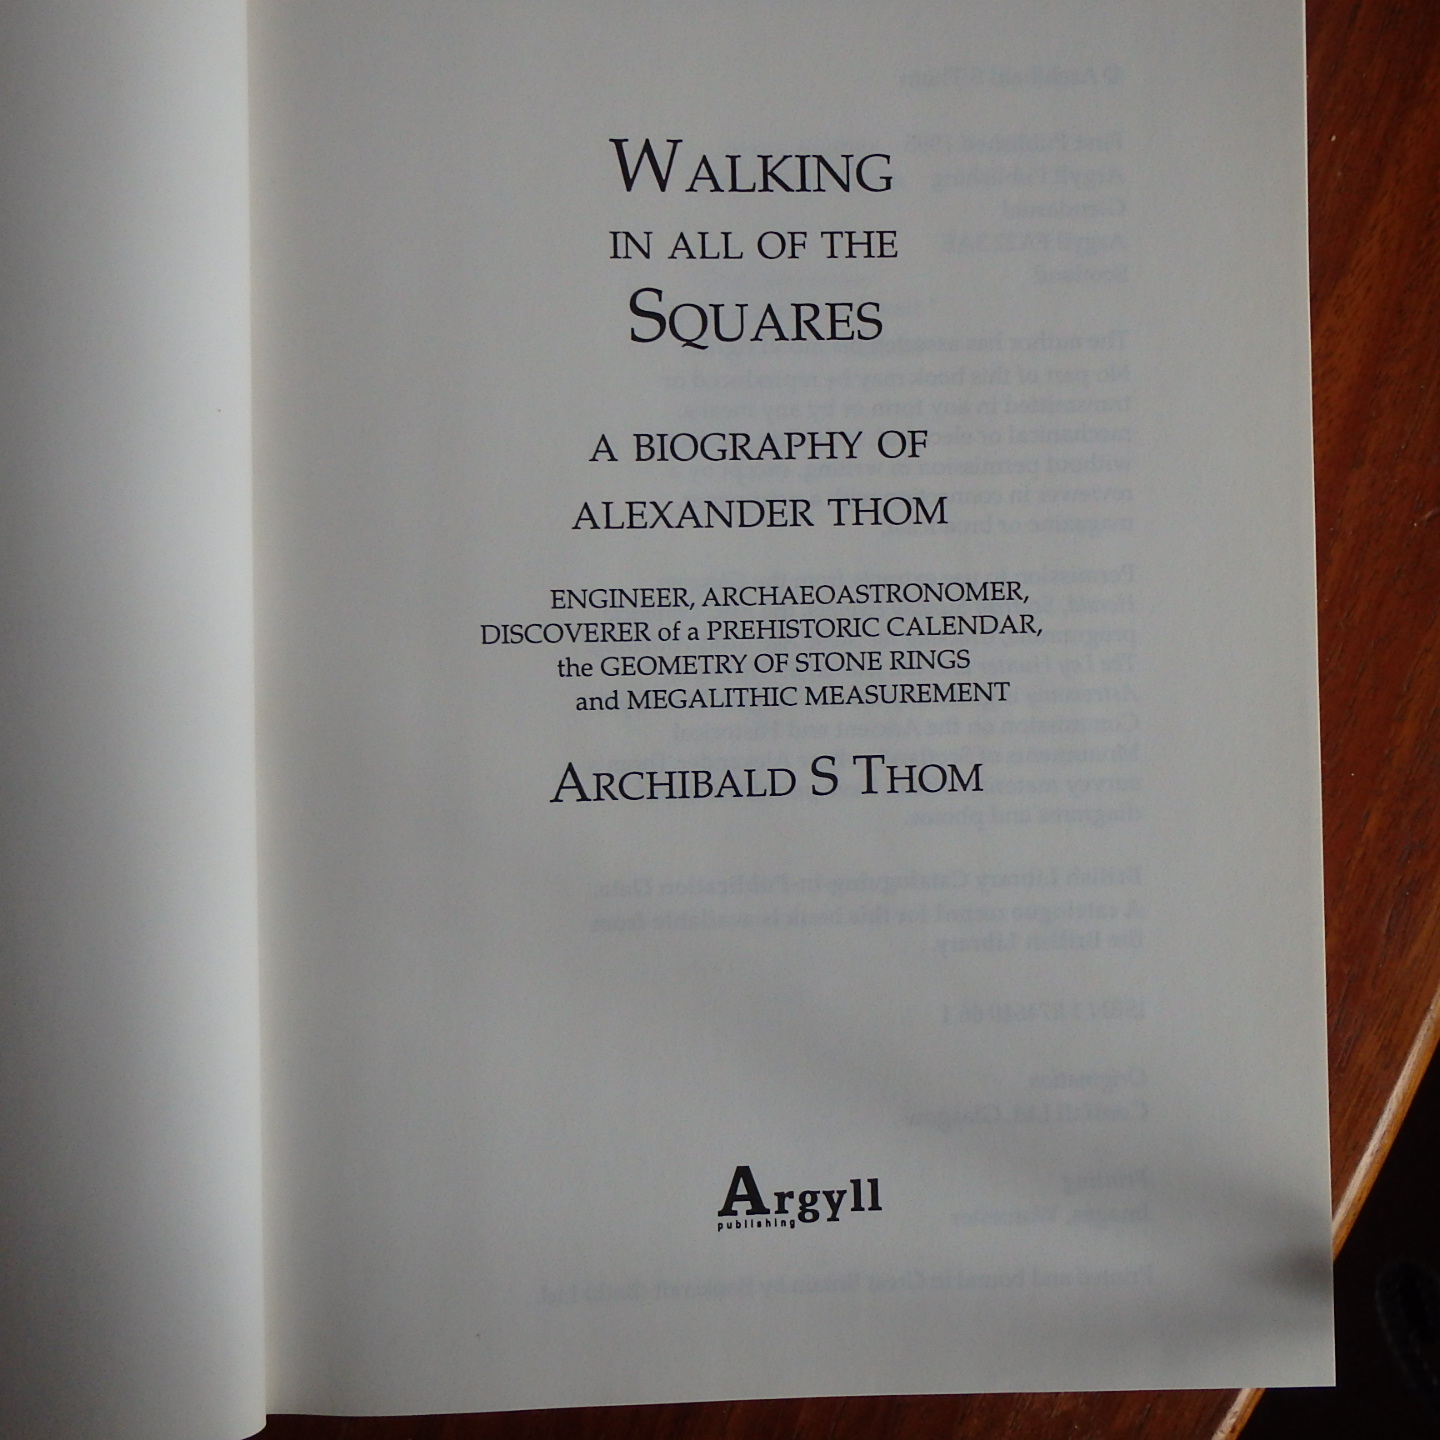 Walking in all of the Squares - A Biography of Alexander Thom by Thom ...